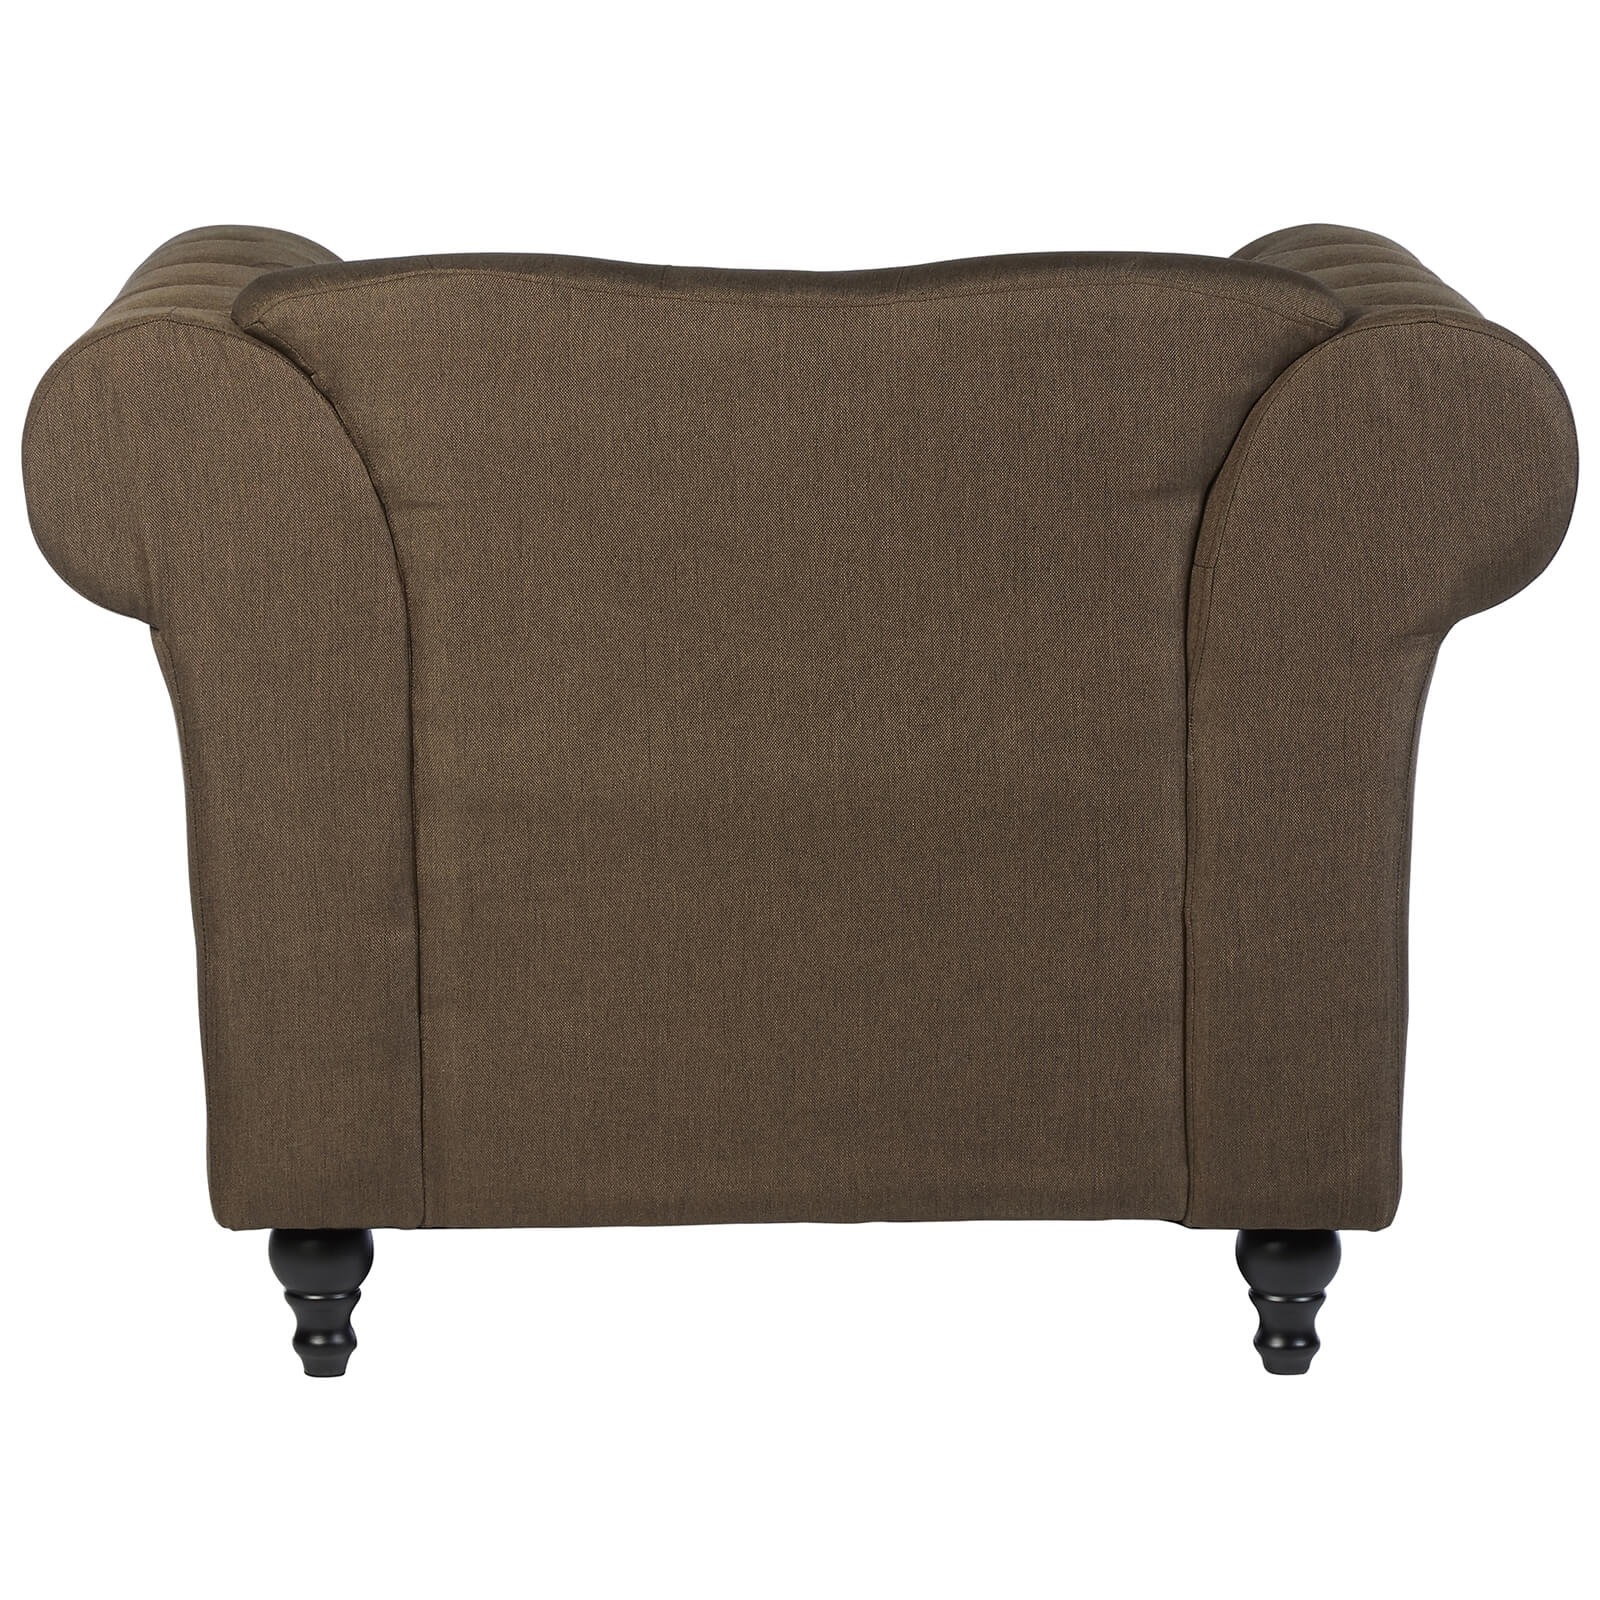 Fable Chesterfield Armchair - Natural